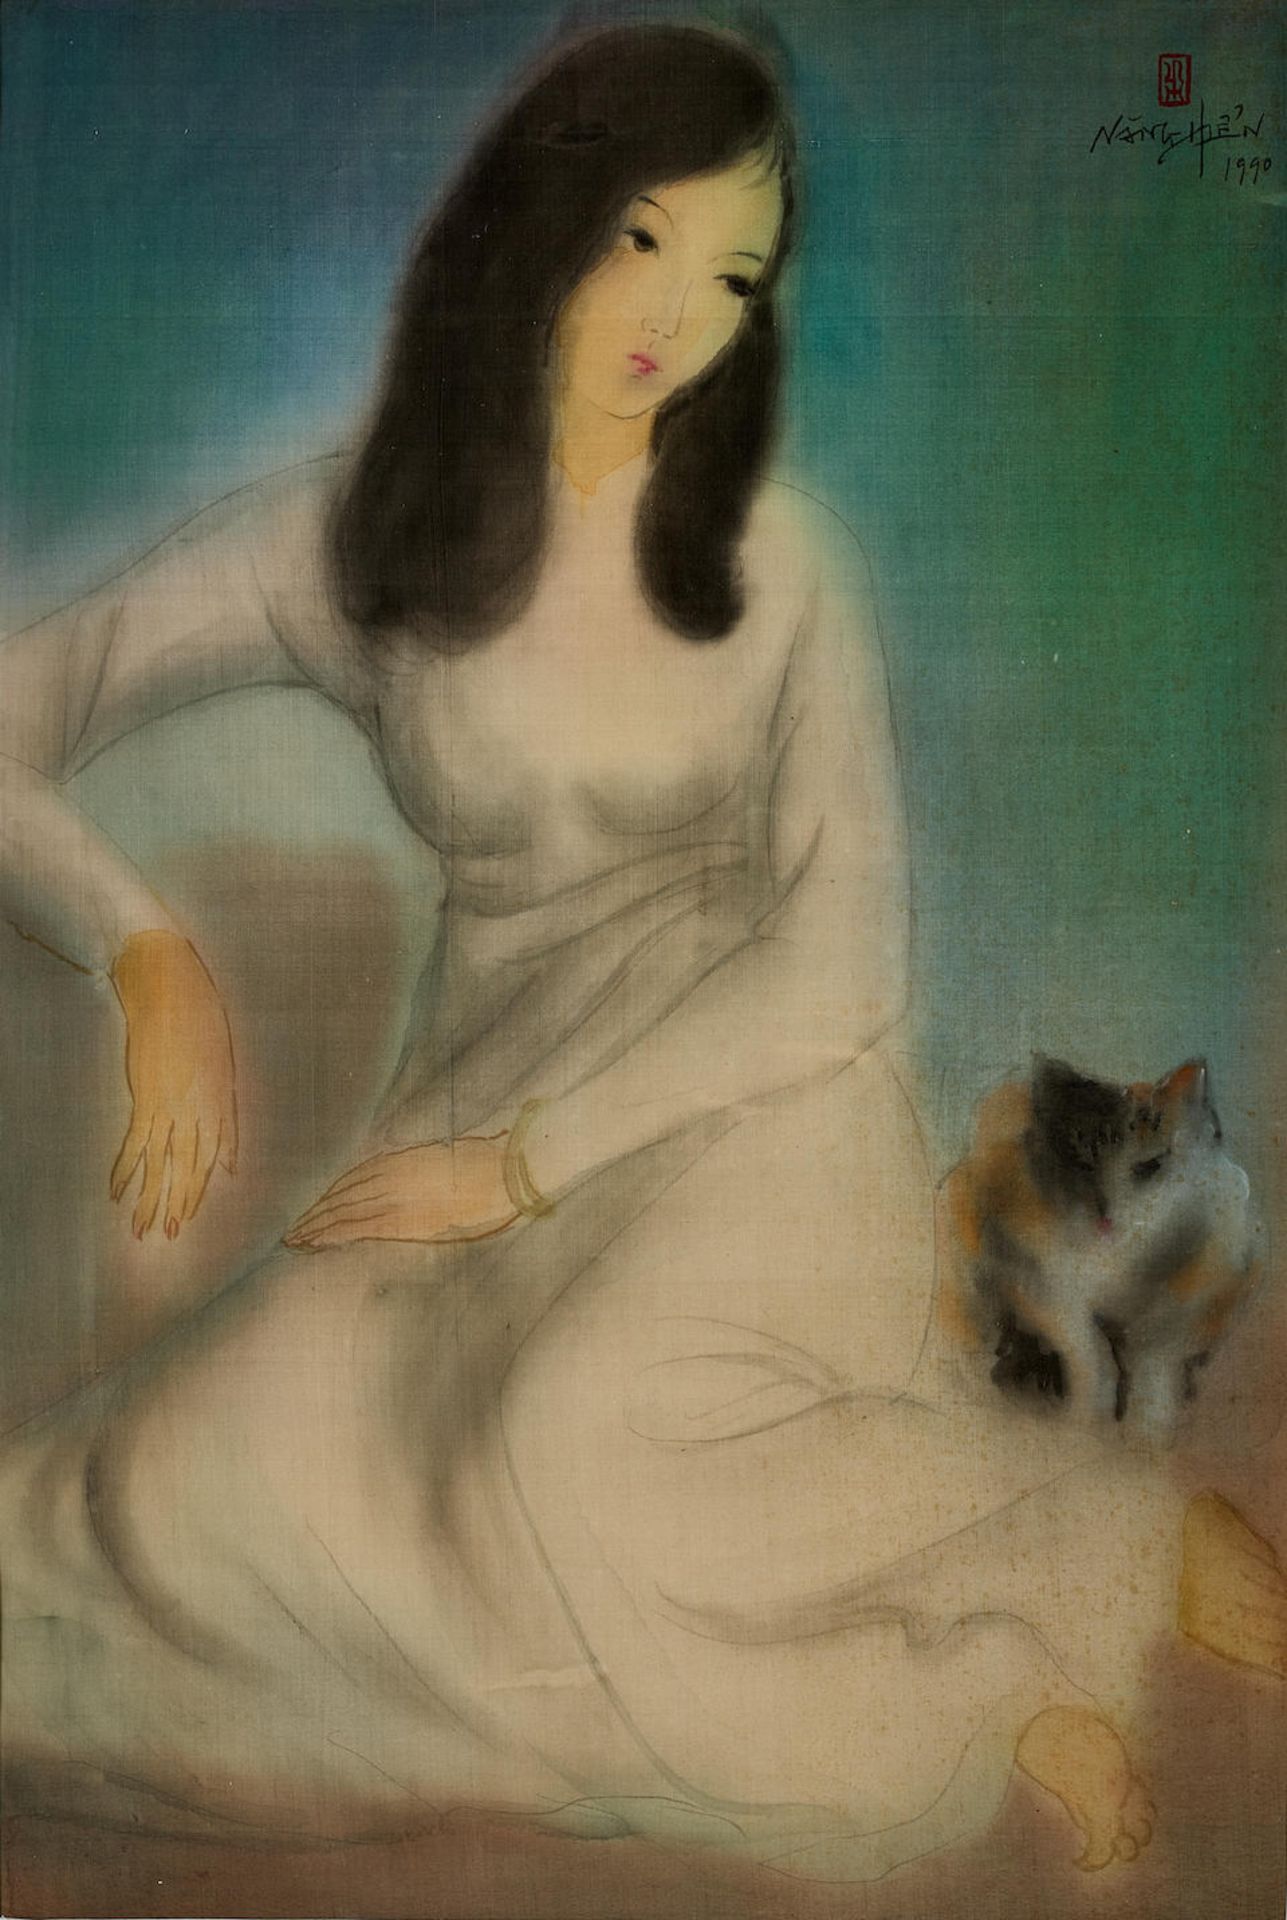 Le Nang Hien (Vietnamese, 1921-2014) Seated Lady with a Cat